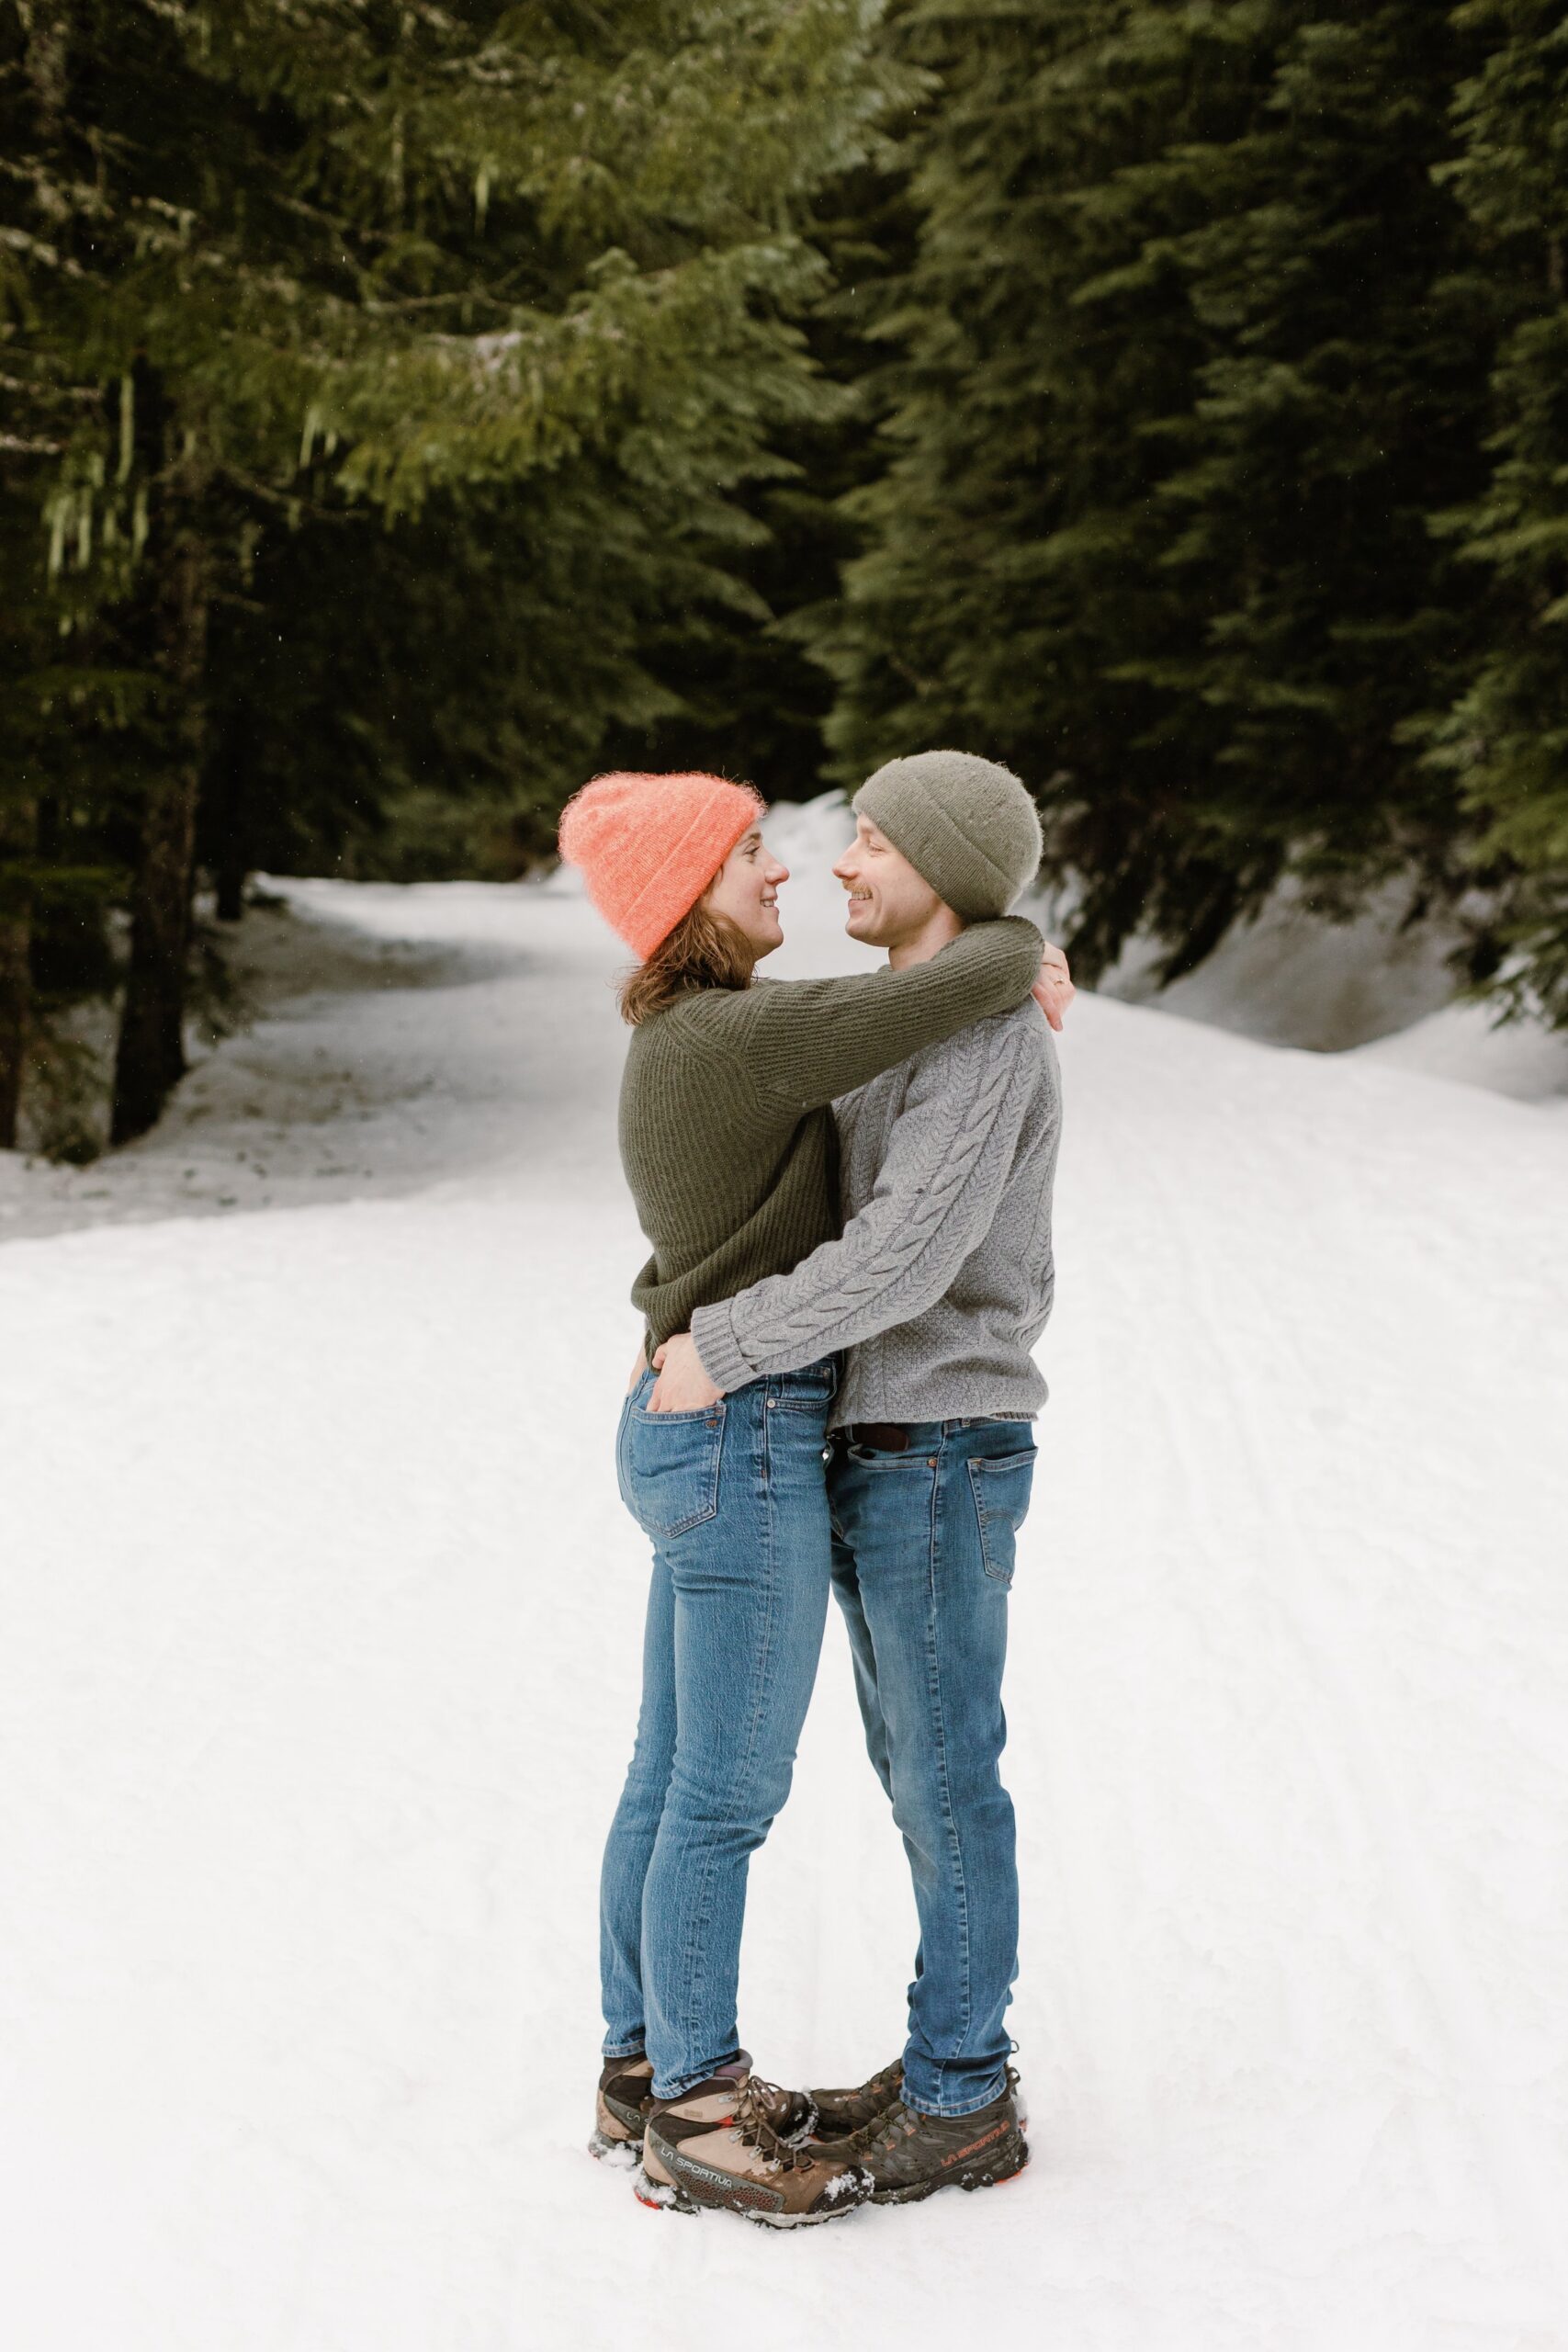 boy and girl embrace while standing on snow and surrounded by evergreen trees